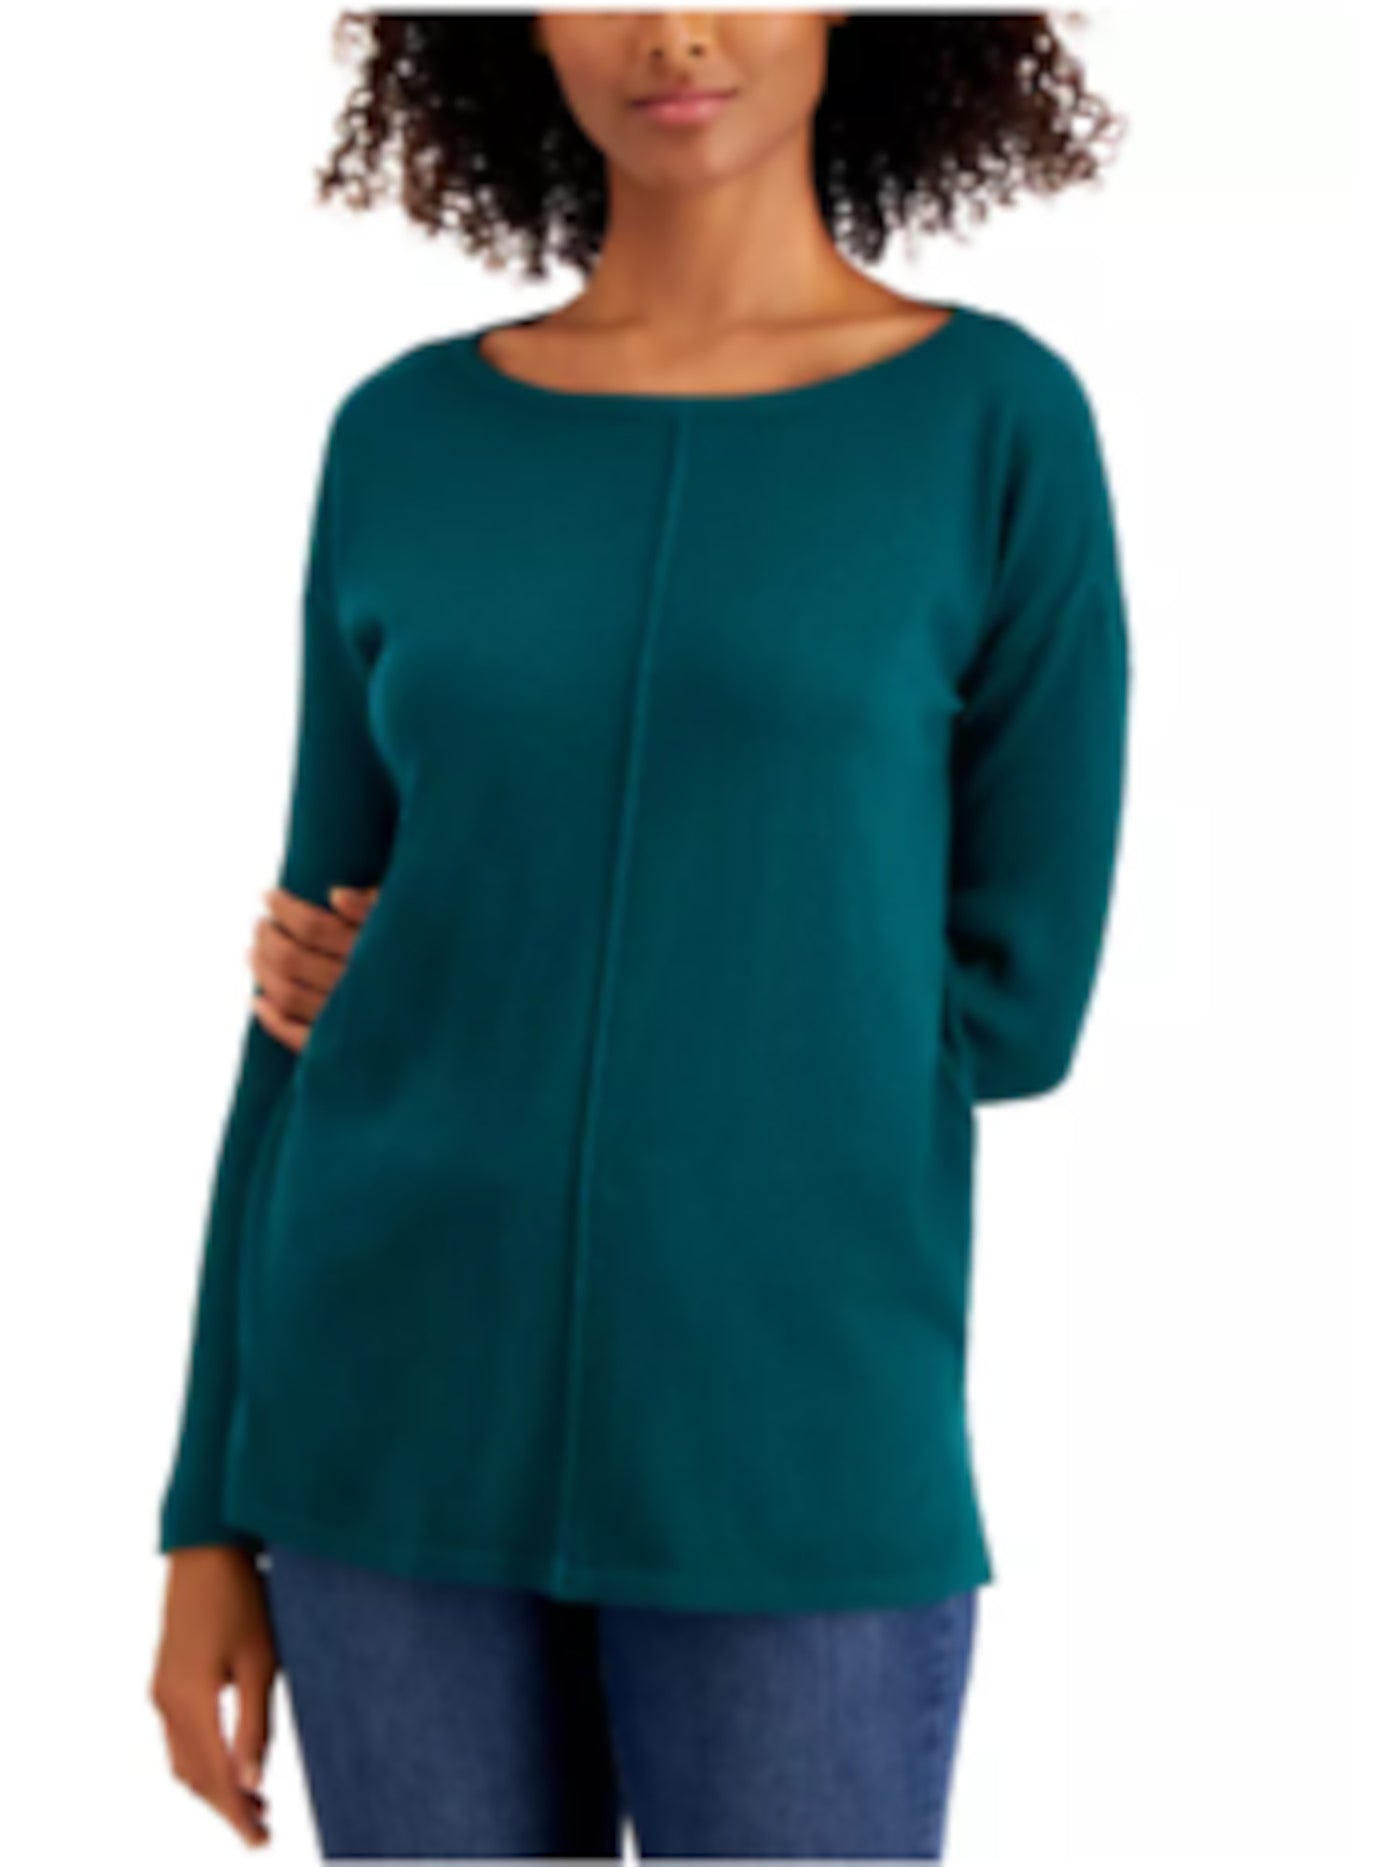 STYLE & COMPANY Womens Teal Stretch Ribbed Slitted Seam-front Long Sleeve Boat Neck Wear To Work Tunic Sweater Plus 2X